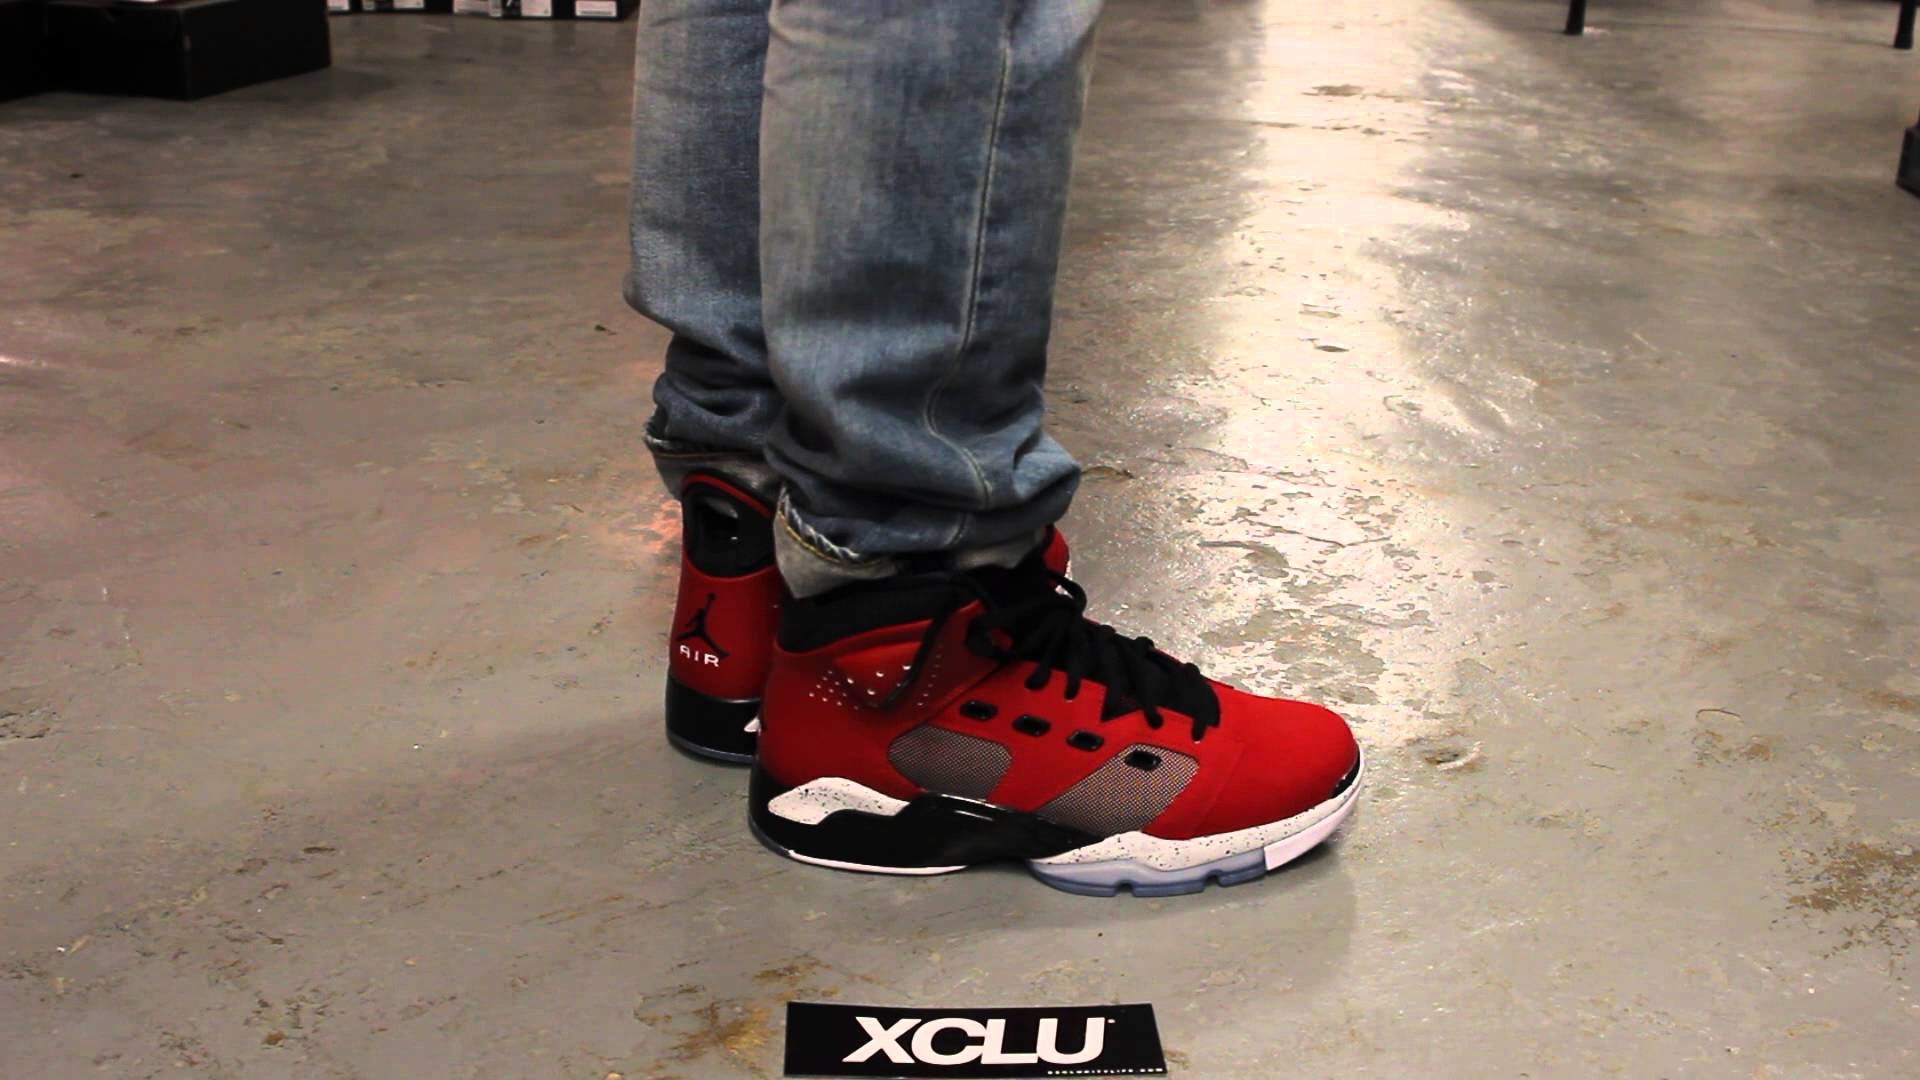 1920x1080 Air Jordan 6-17-23 Color "Gym Red/Black-Pure Platinum-White" - On Feet  Video @ Exclucity - YouTube